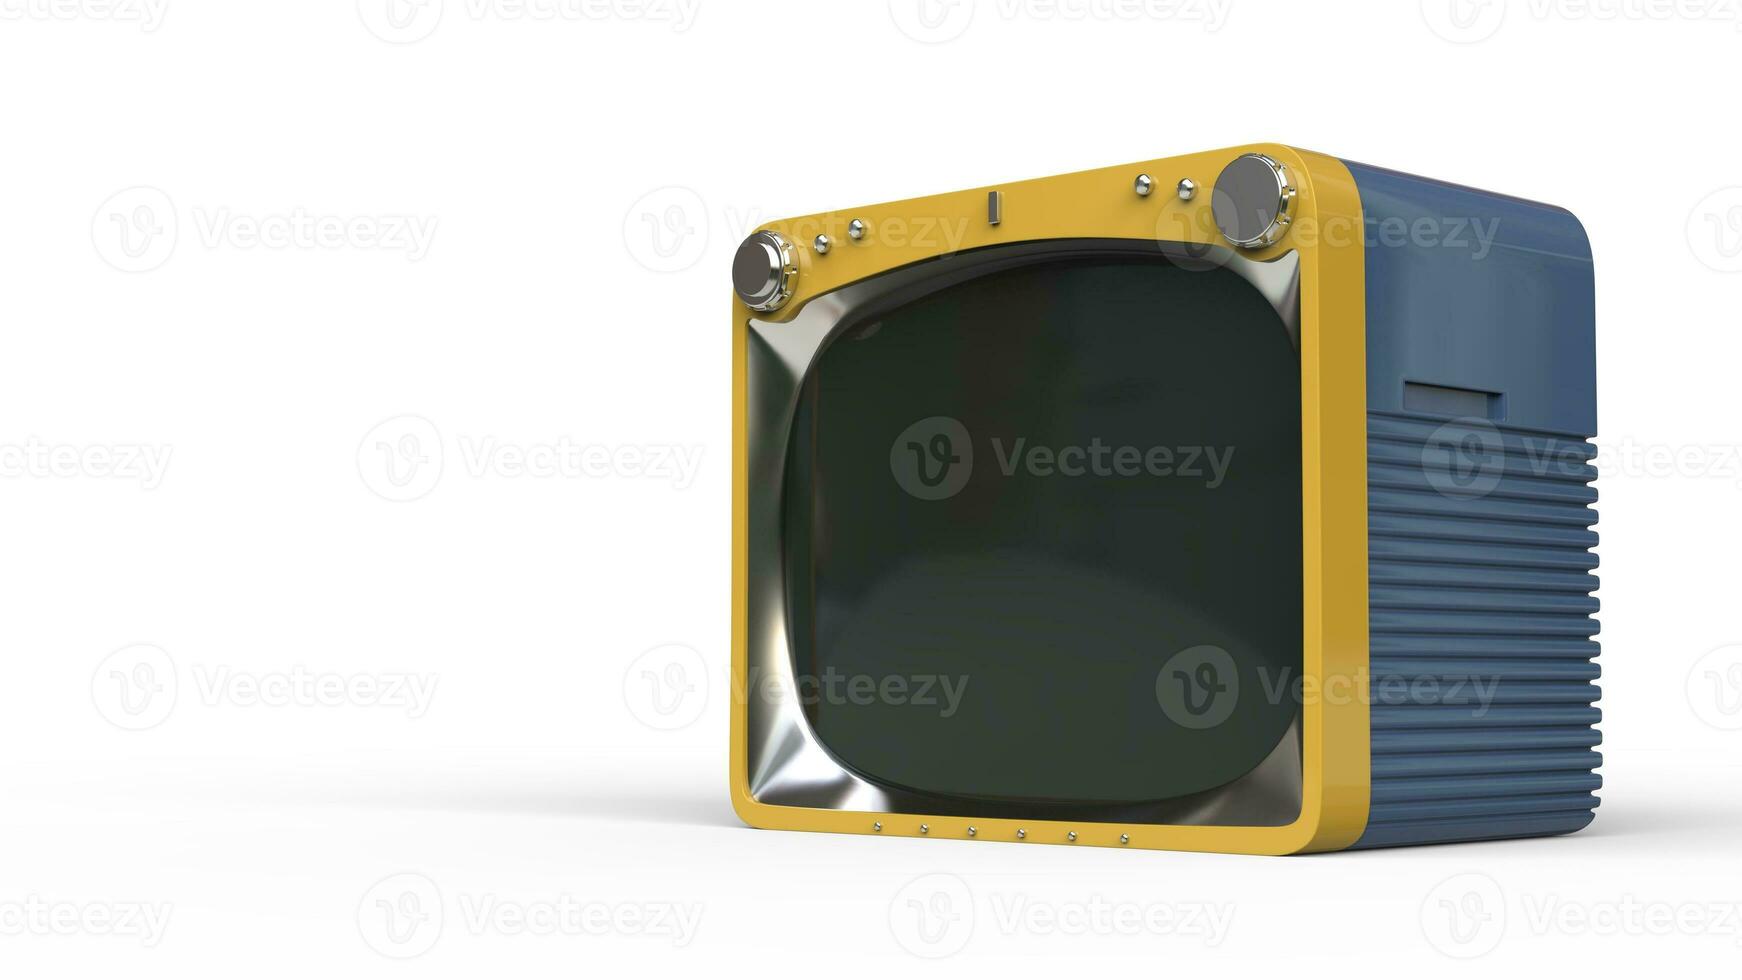 Vintage blue TV set with mustard yellow front photo